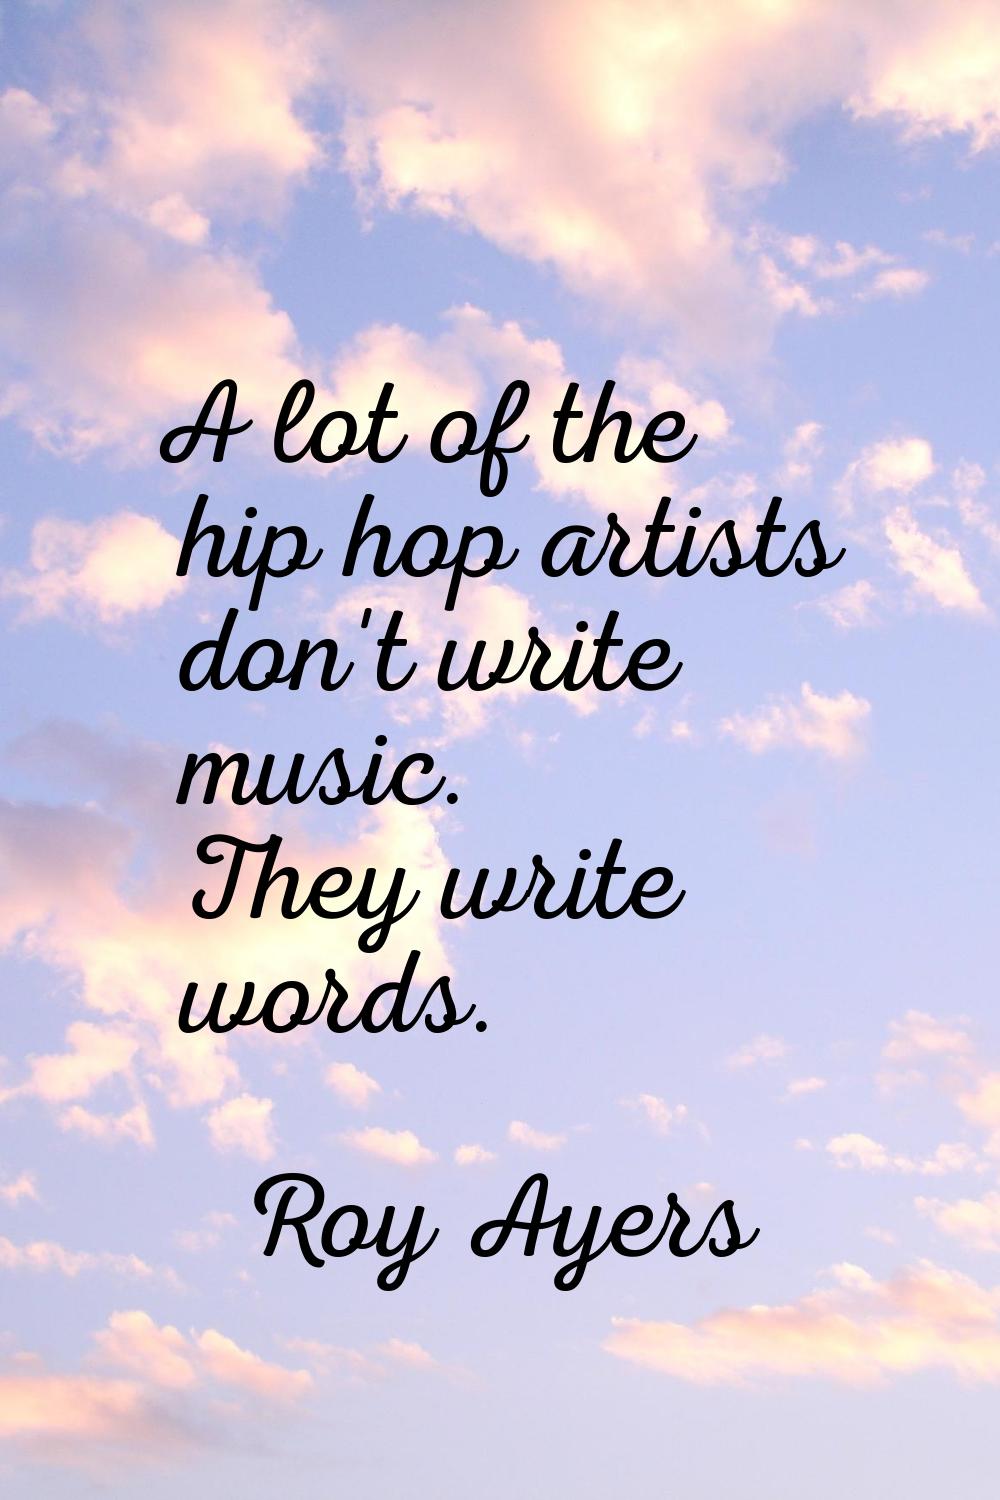 A lot of the hip hop artists don't write music. They write words.